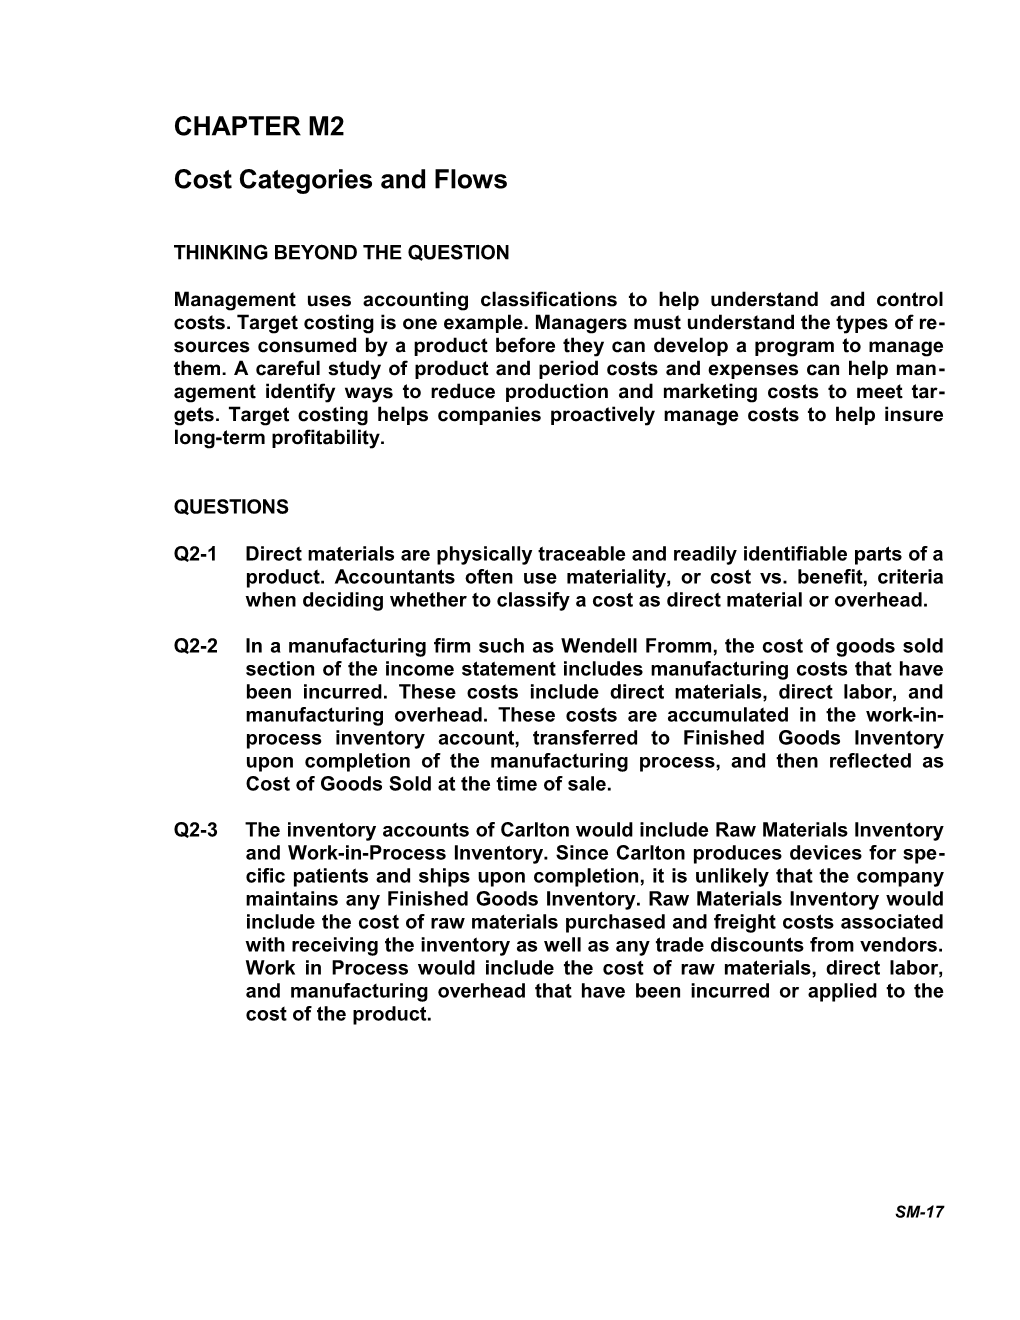 Cost Categories and Flows